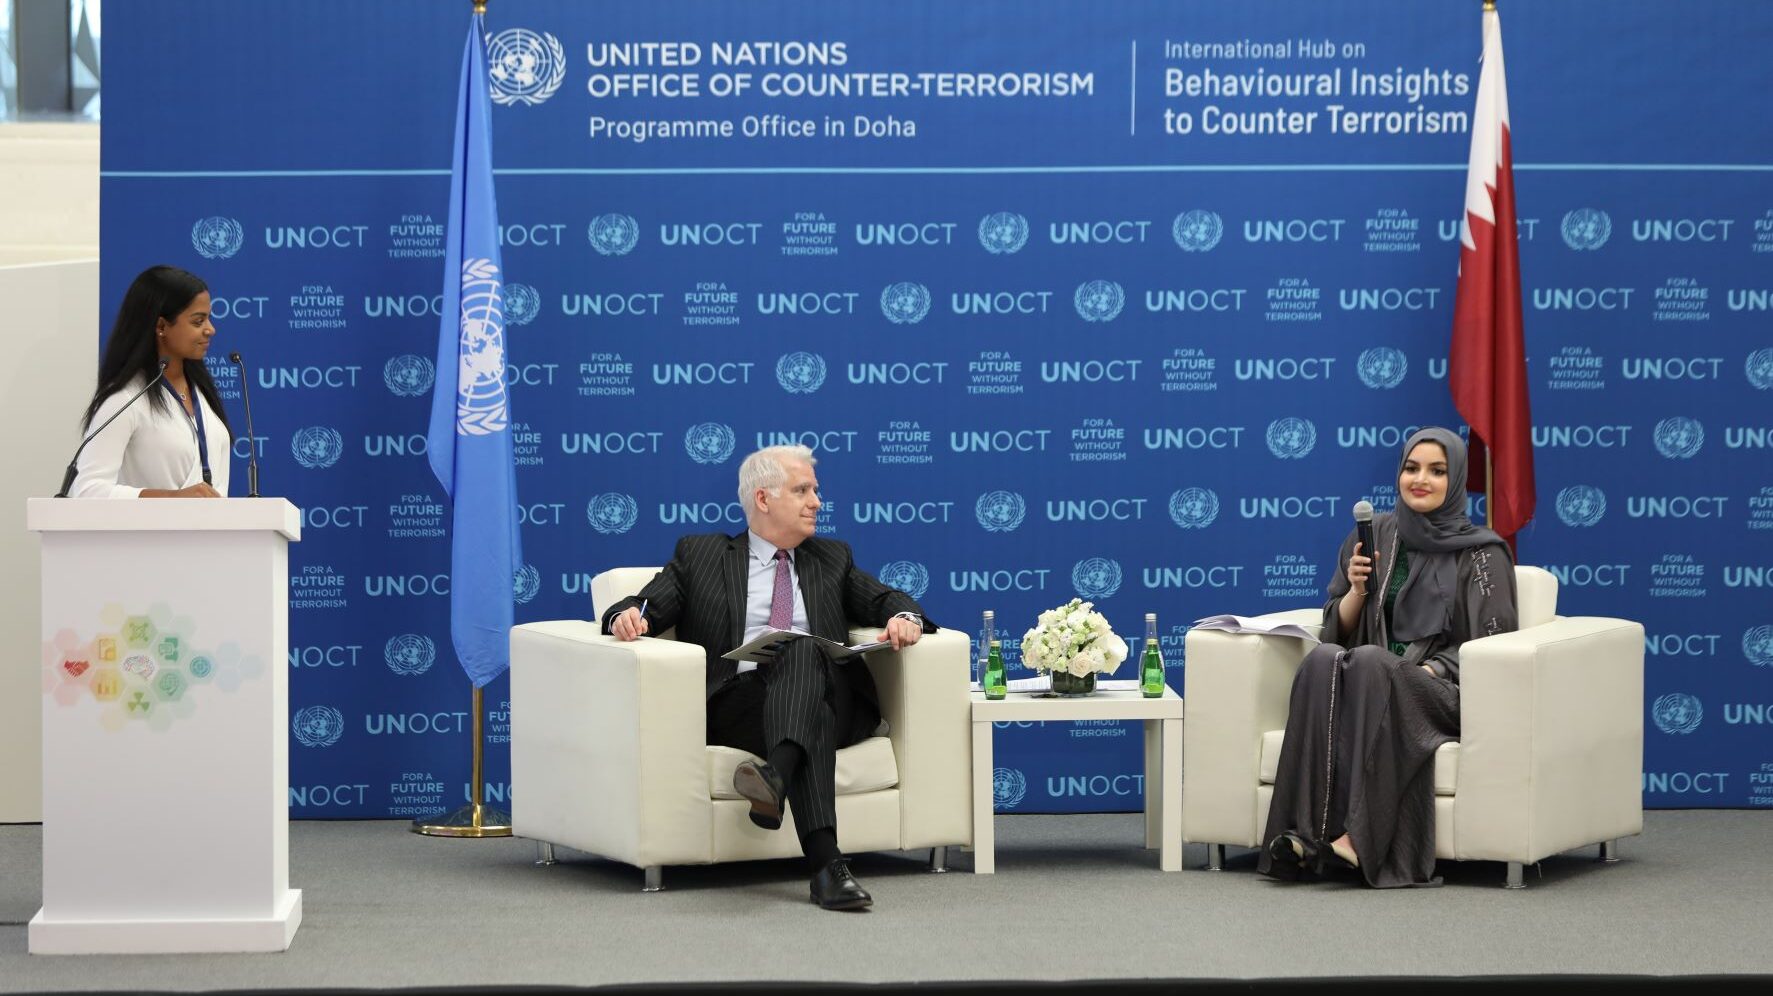 Maryam Abdulaziz Al-Thani moderating the United Nations Office of Counter-Terrorism (UNOCT) Global Youth Town Hall with Director and Deputy to the Under-Secretary-General at UNOCT Raffi Gregorian